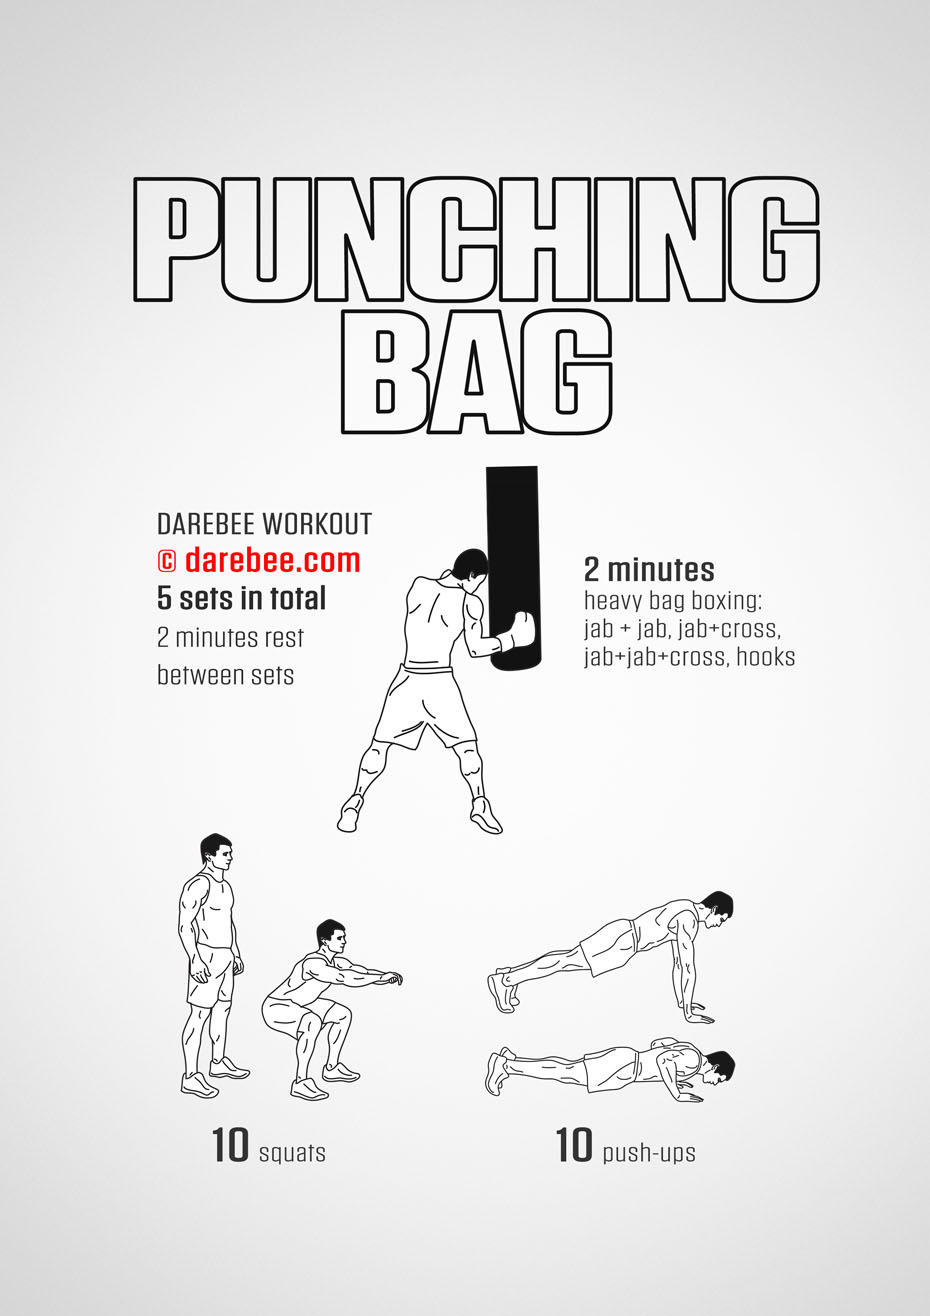 Heavy Bag Workout | 10 Minute Follow Along Boxing Workout - YouTube